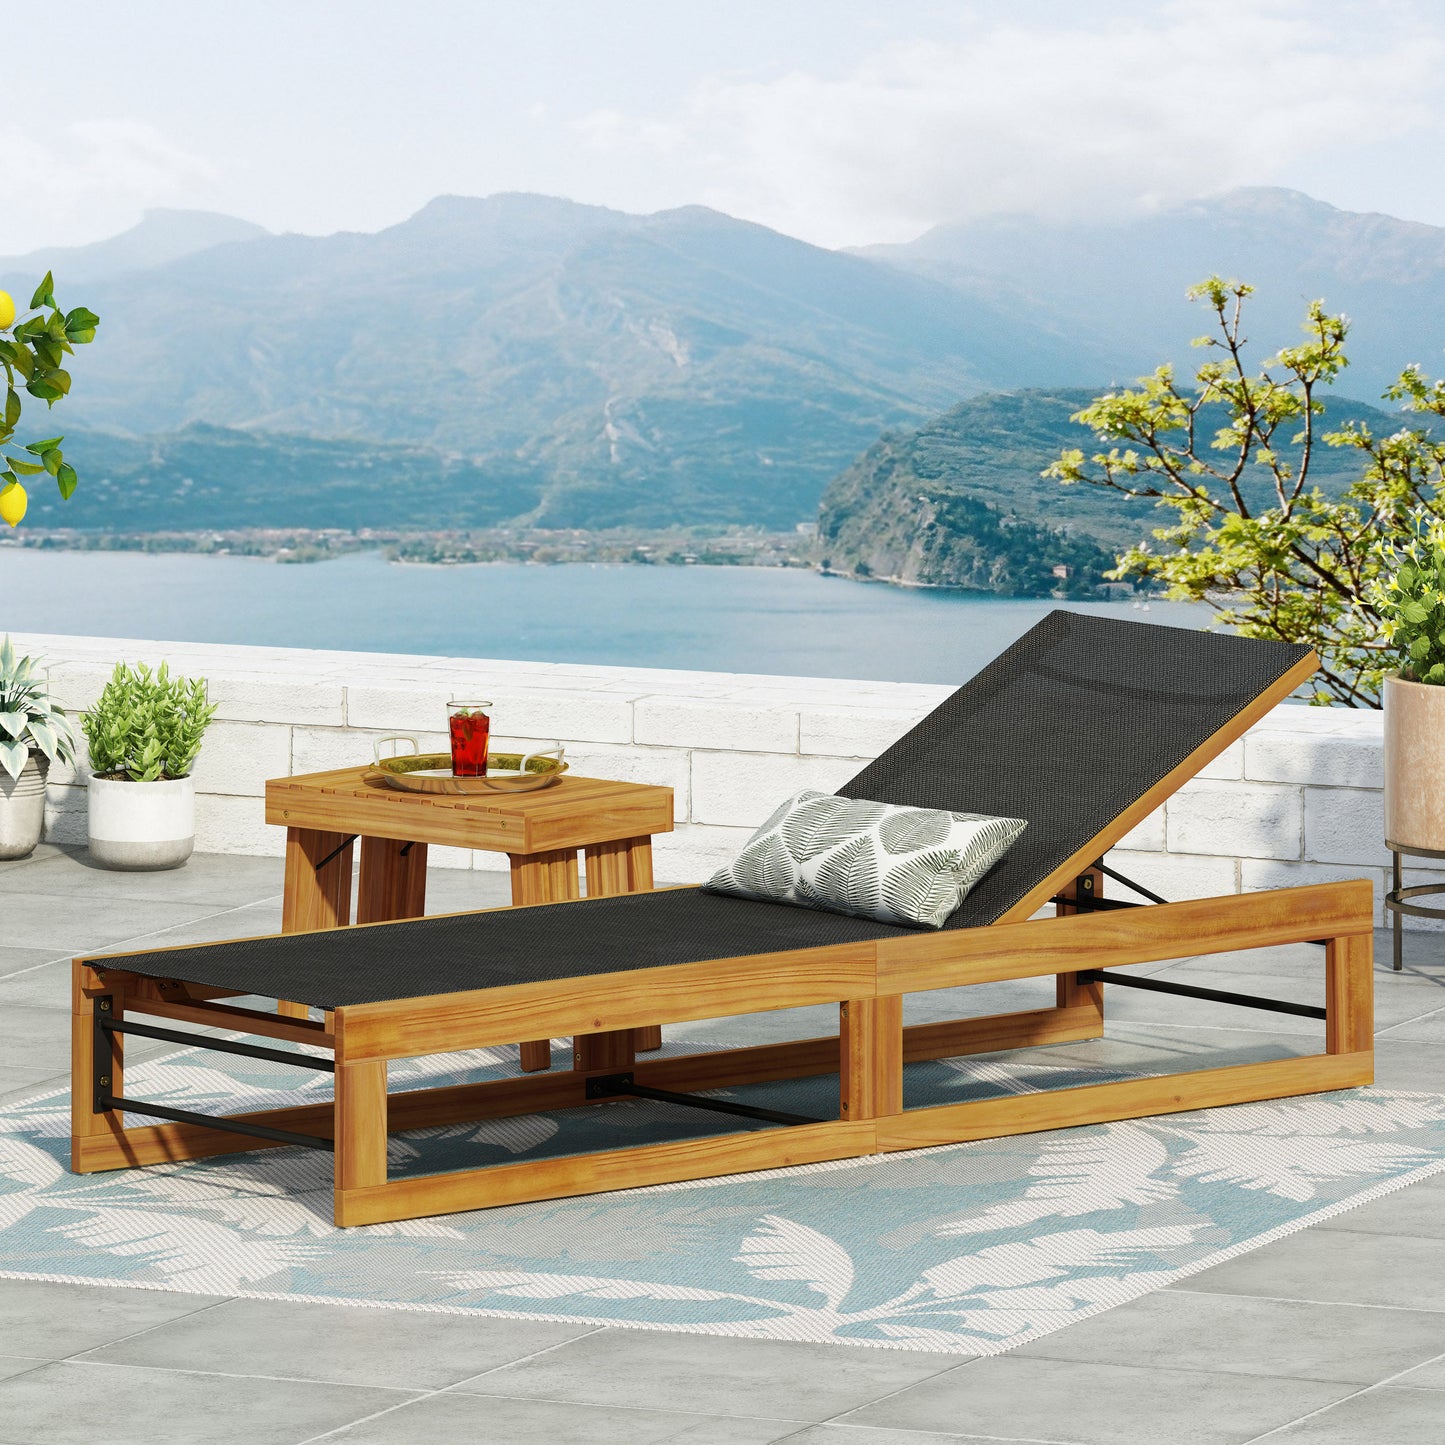 Leavitt Outdoor Mesh and Wood Adjustable Chaise Lounge, Black and Teak